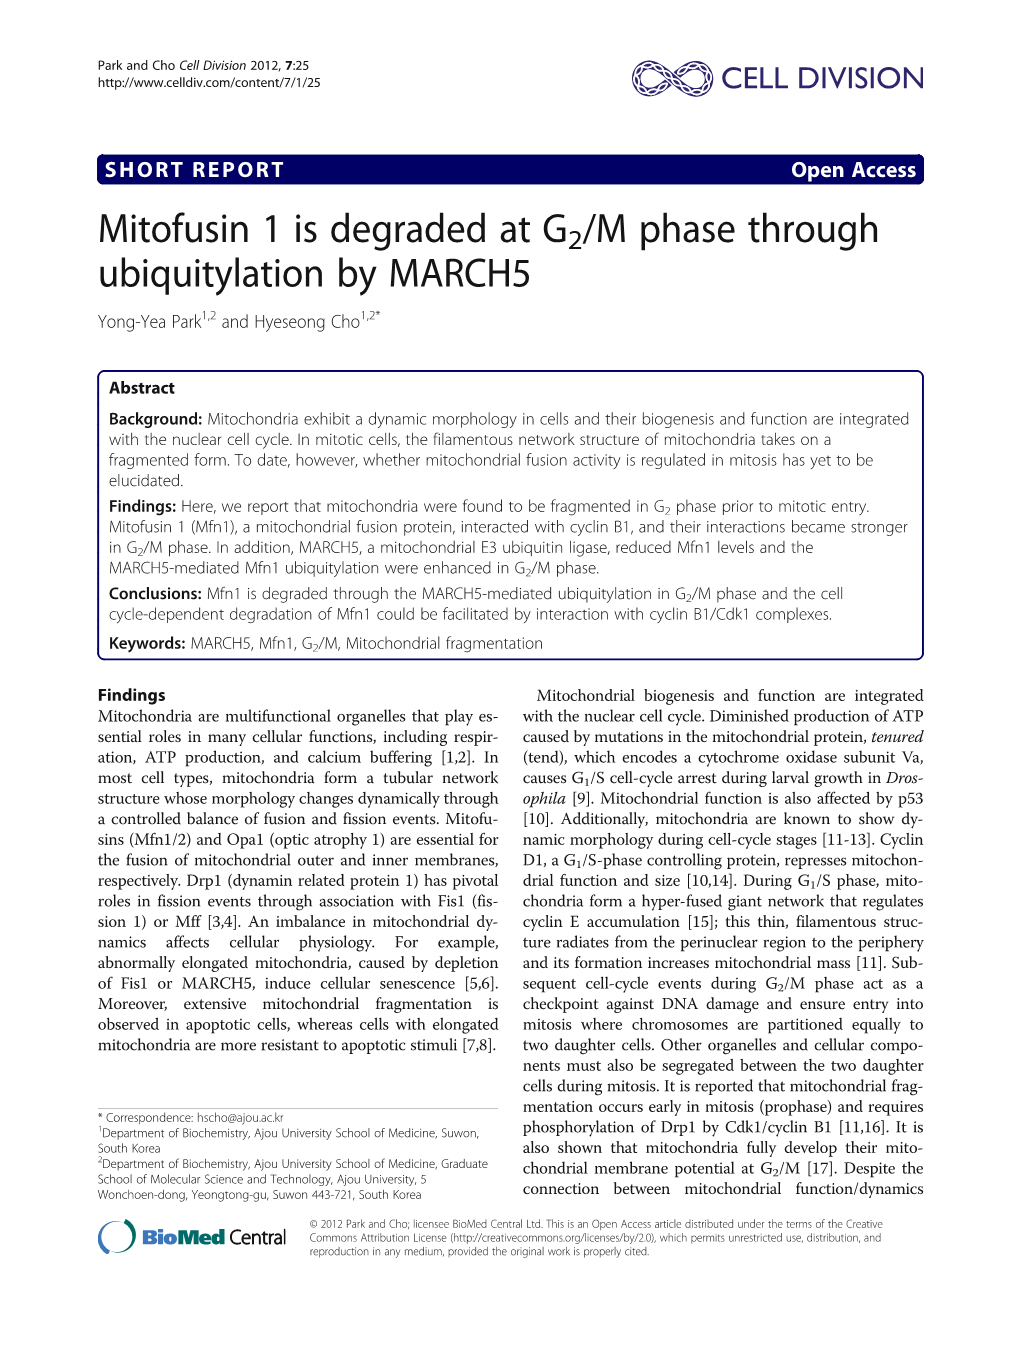 Mitofusin 1 Is Degraded at G2/M Phase Through Ubiquitylation by MARCH5 Yong-Yea Park1,2 and Hyeseong Cho1,2*